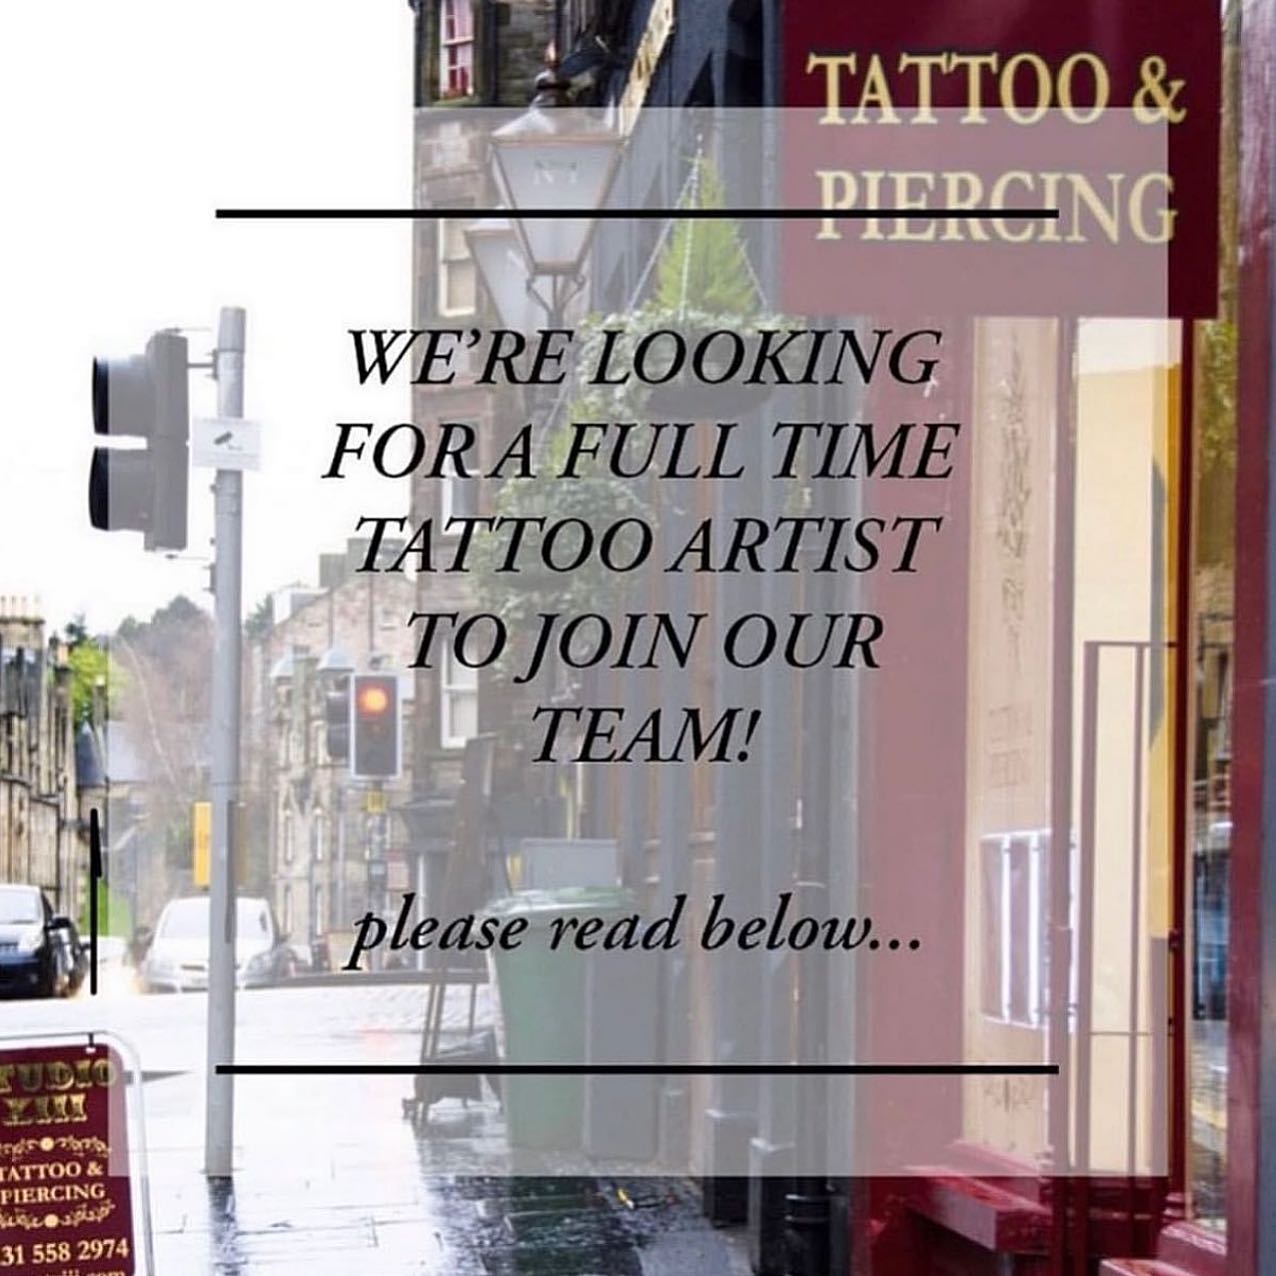 We at Studio XIII are looking for a new ✨ REALISM ✨ artist to come and join us full time!

Previous experience in a shop is an absolute must. We’re a close knit team so we’re looking for someone with no ego and no drama, who’s happy to be a team player. 
Our shop is extremely busy so it’s an exciting opportunity to develop as an artist but this is NOT an apprenticeship. 

If you’ve had a look at our work and think you’d be a good fit for our shop, please send us an email to:

infostudioxiii.tattoo 

We look forward to hearing from you! ✨

               